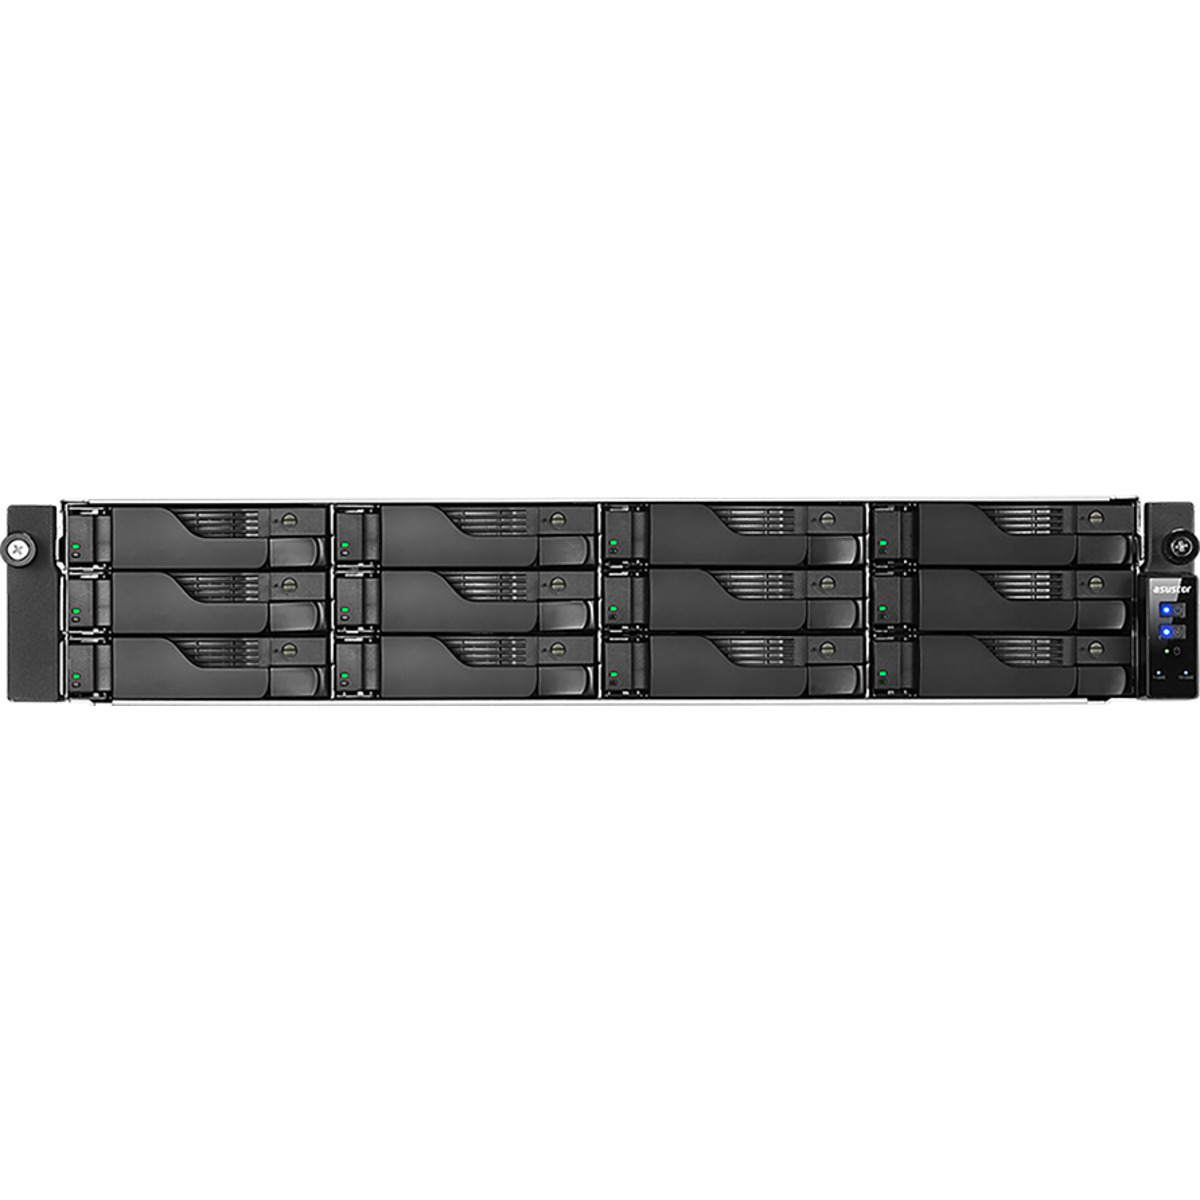 ASUSTOR LOCKERSTOR 12RD AS6512RD 144tb 12-Bay RackMount Multimedia / Power User / Business NAS - Network Attached Storage Device 8x18tb Western Digital Red Pro WD181KFGX 3.5 7200rpm SATA 6Gb/s HDD NAS Class Drives Installed - Burn-In Tested - FREE RAM UPGRADE LOCKERSTOR 12RD AS6512RD